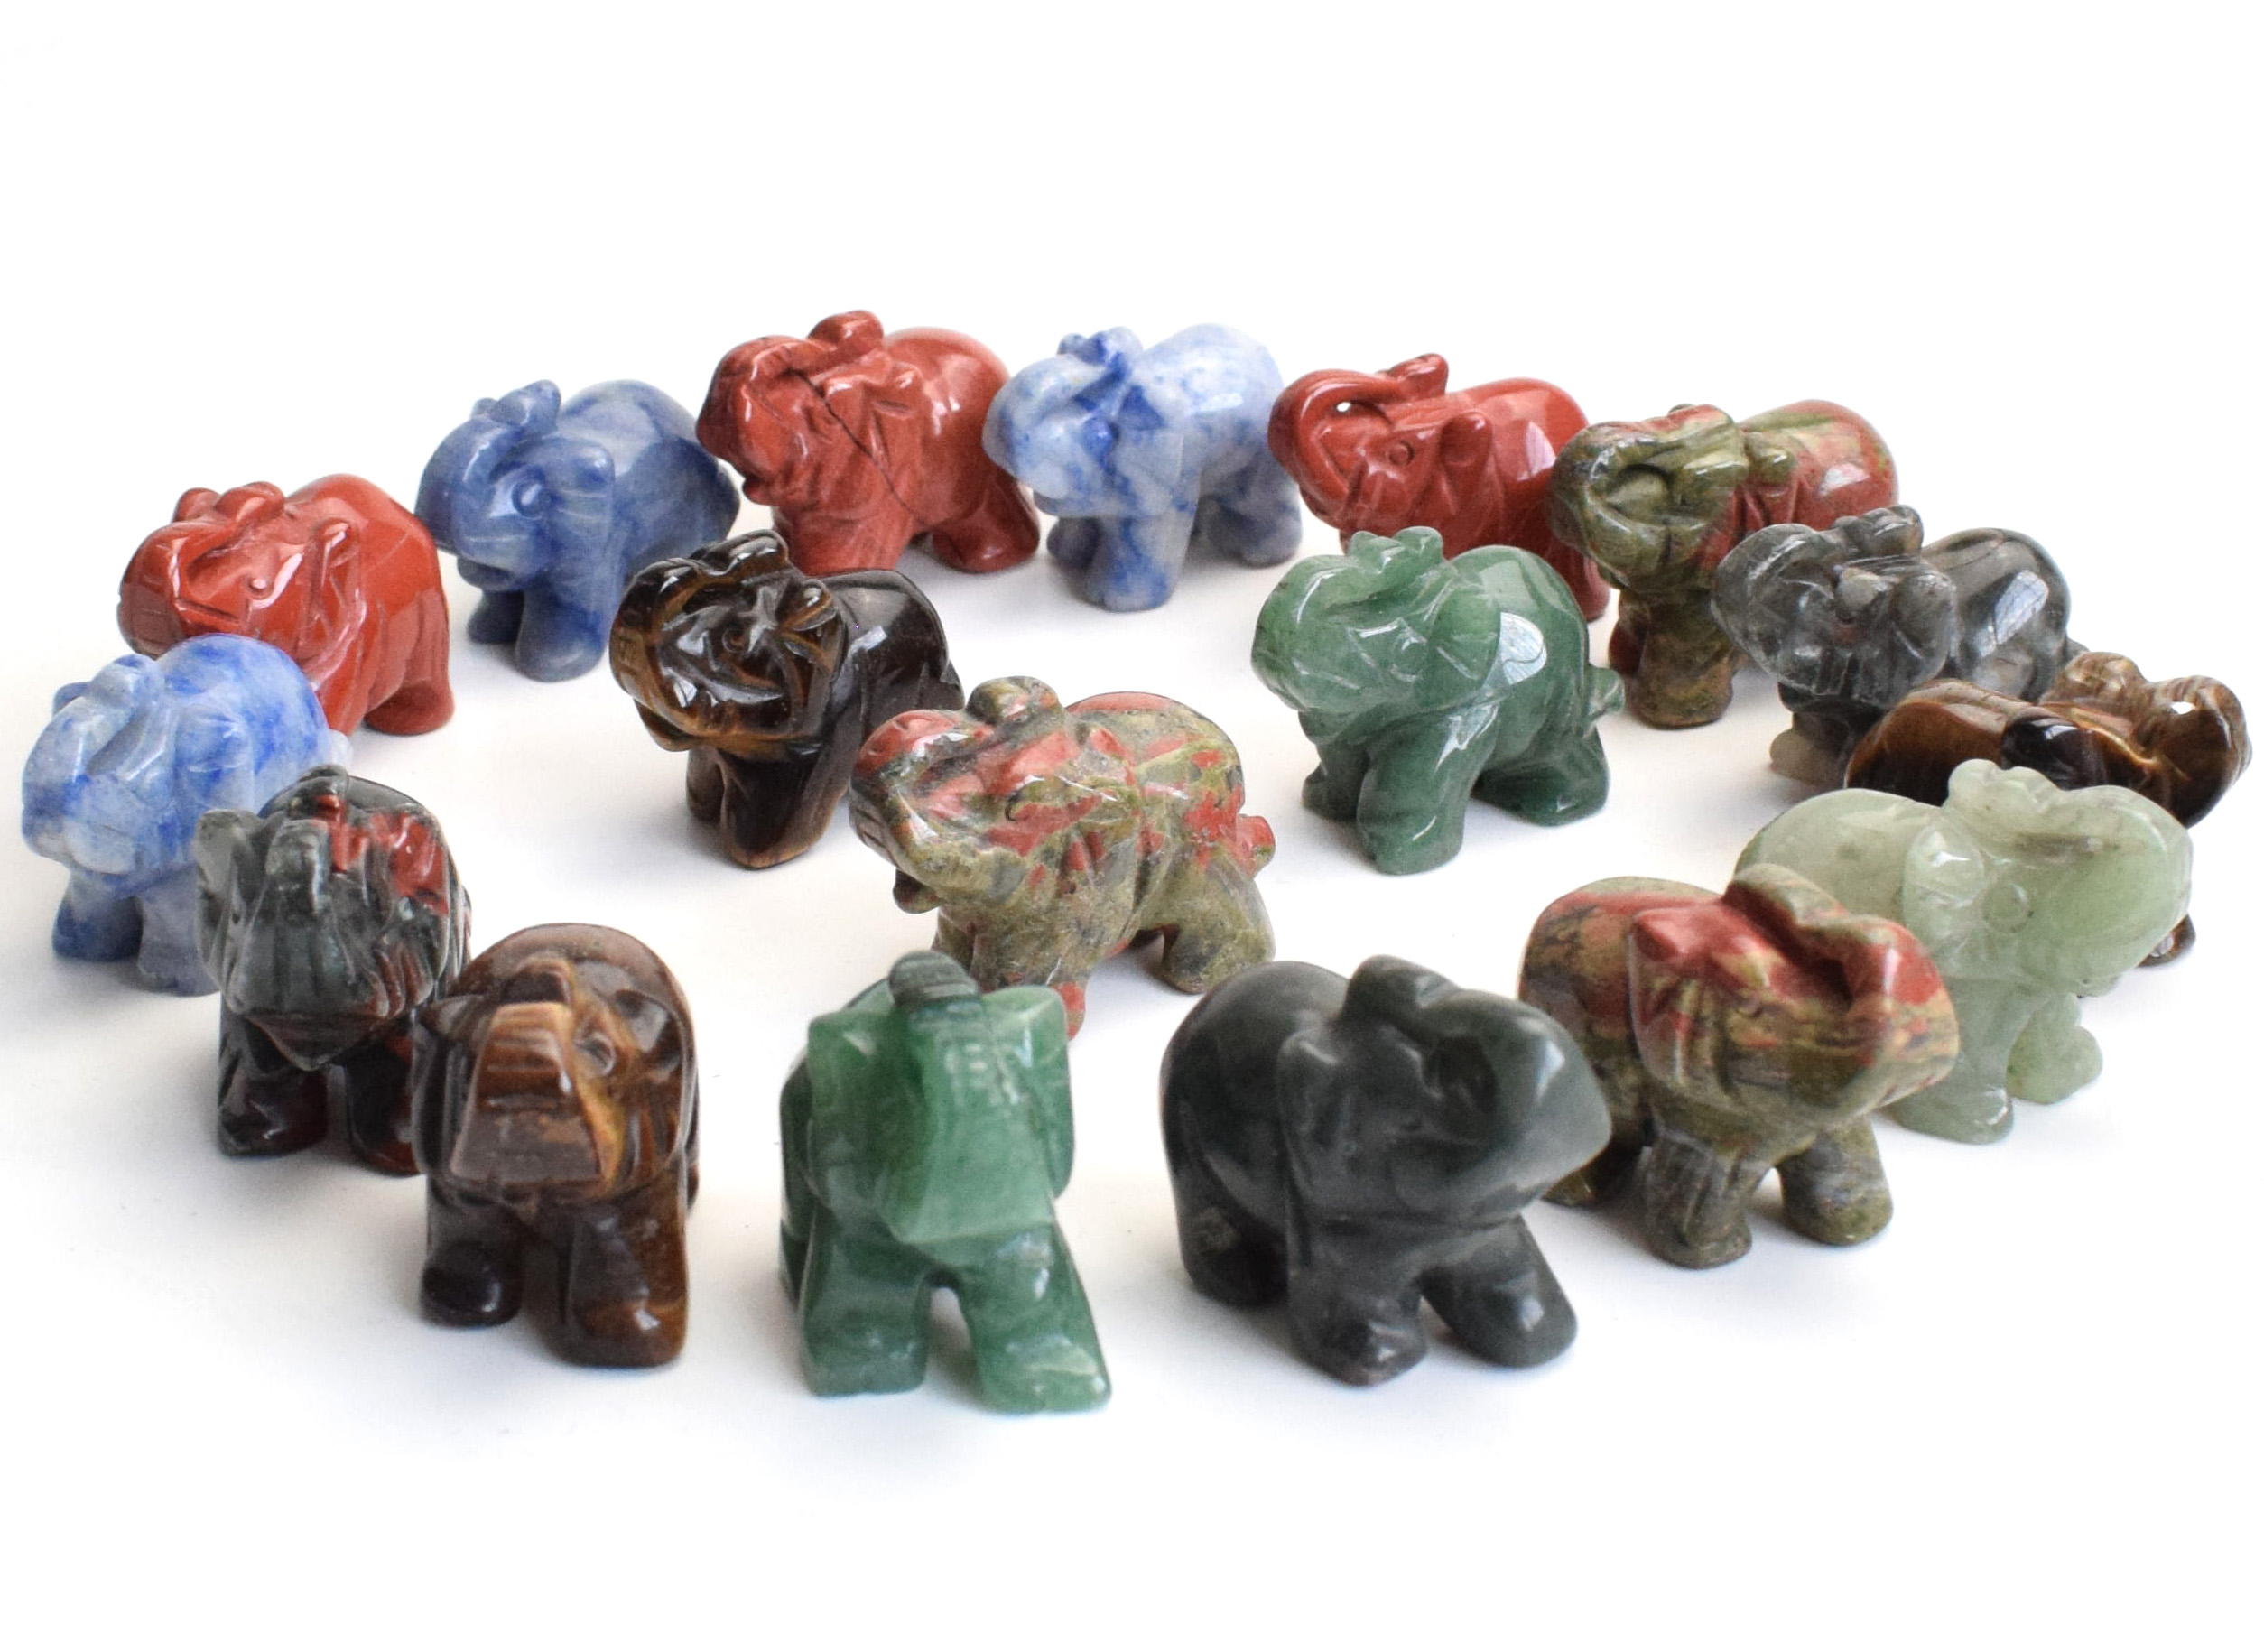 1.5 INCHES Small Size Elephant Statue Crafts Natural Chakra Stone Carved Crystal Reiki Healing Animal Figurine 1pcs от DHgate WW